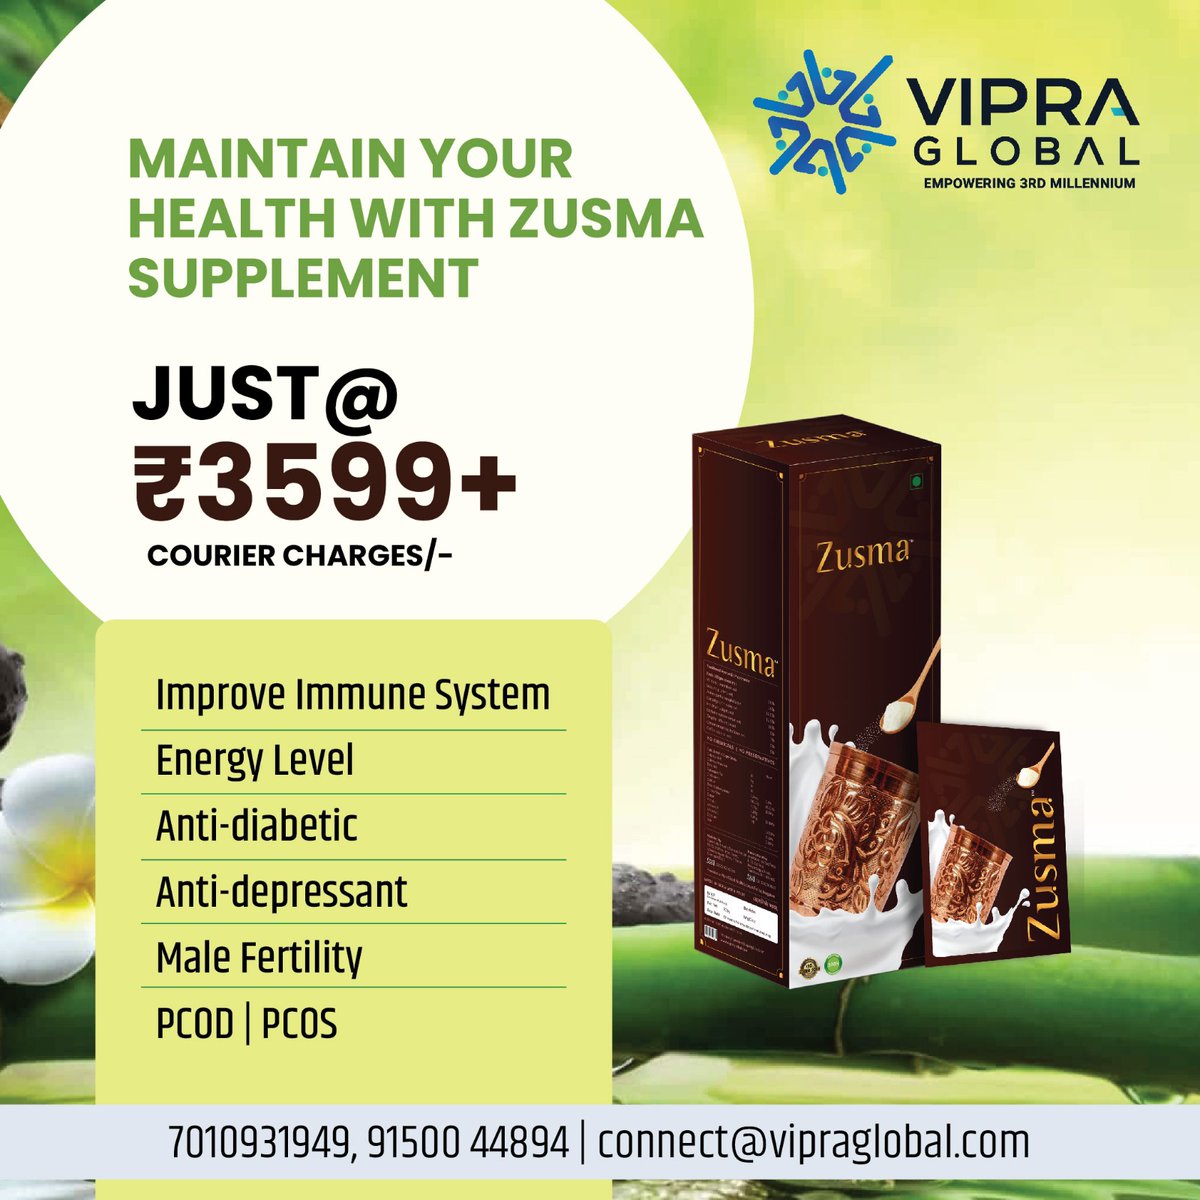 Maintain your health with ZUSMA Supplement
connect@vipraglobal.com
Call - 7010931949 / 9150044894
#ayurveda #ayurvedalifestyle #health #healthylifestyle #ayurvedalife #pcod #pcos #diabetes #immunesystem #health #immunesupport #immunity #immunebooster #malefertility #fertility